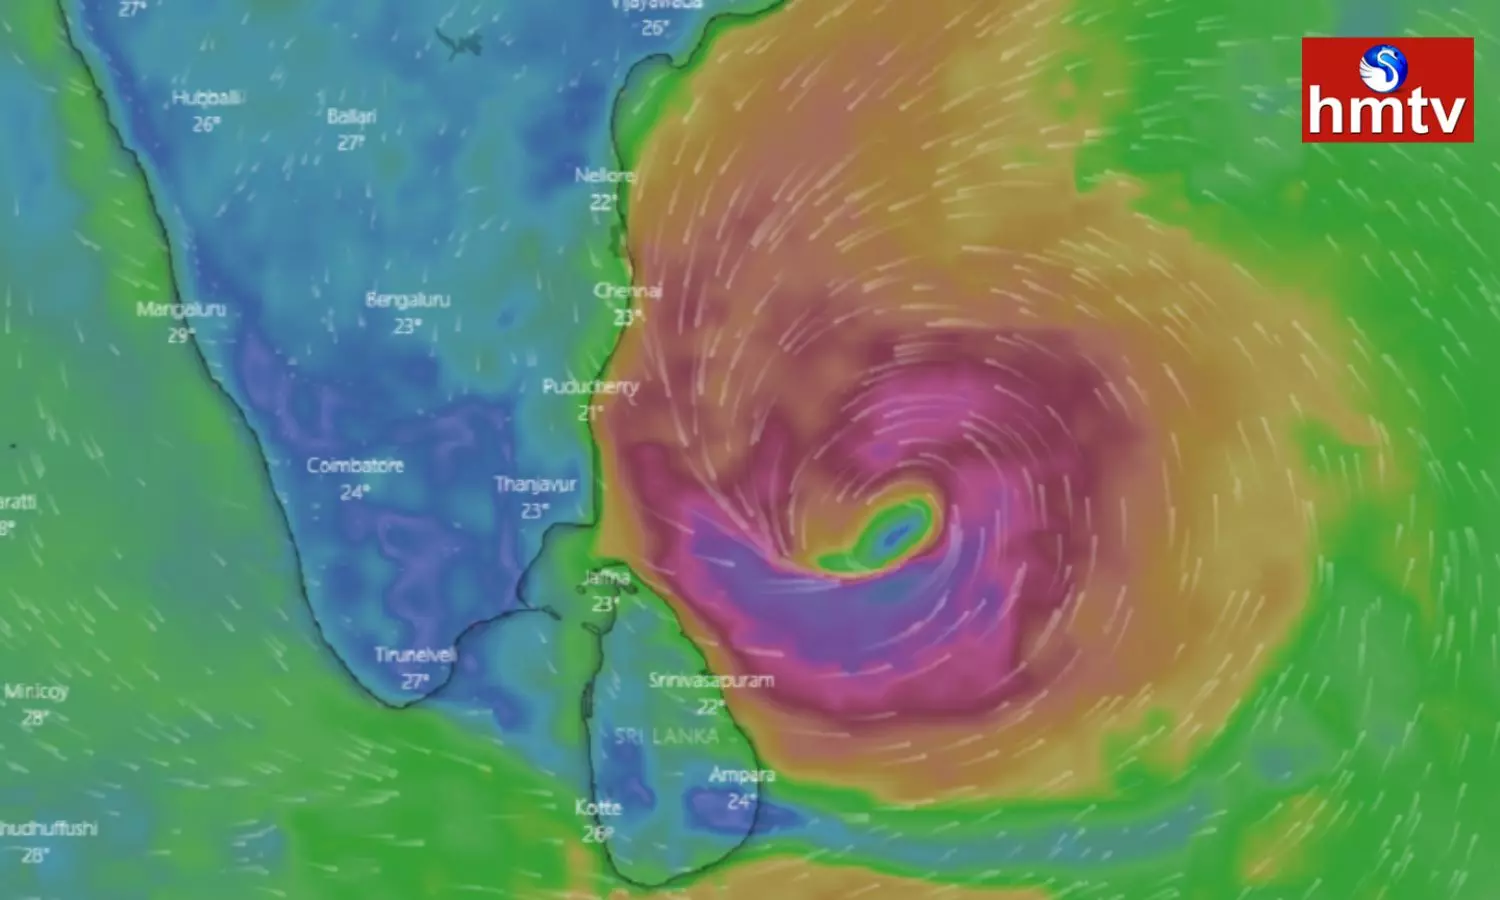 The Cyclone Is Centered Over The Southeast Bay Of Bengal